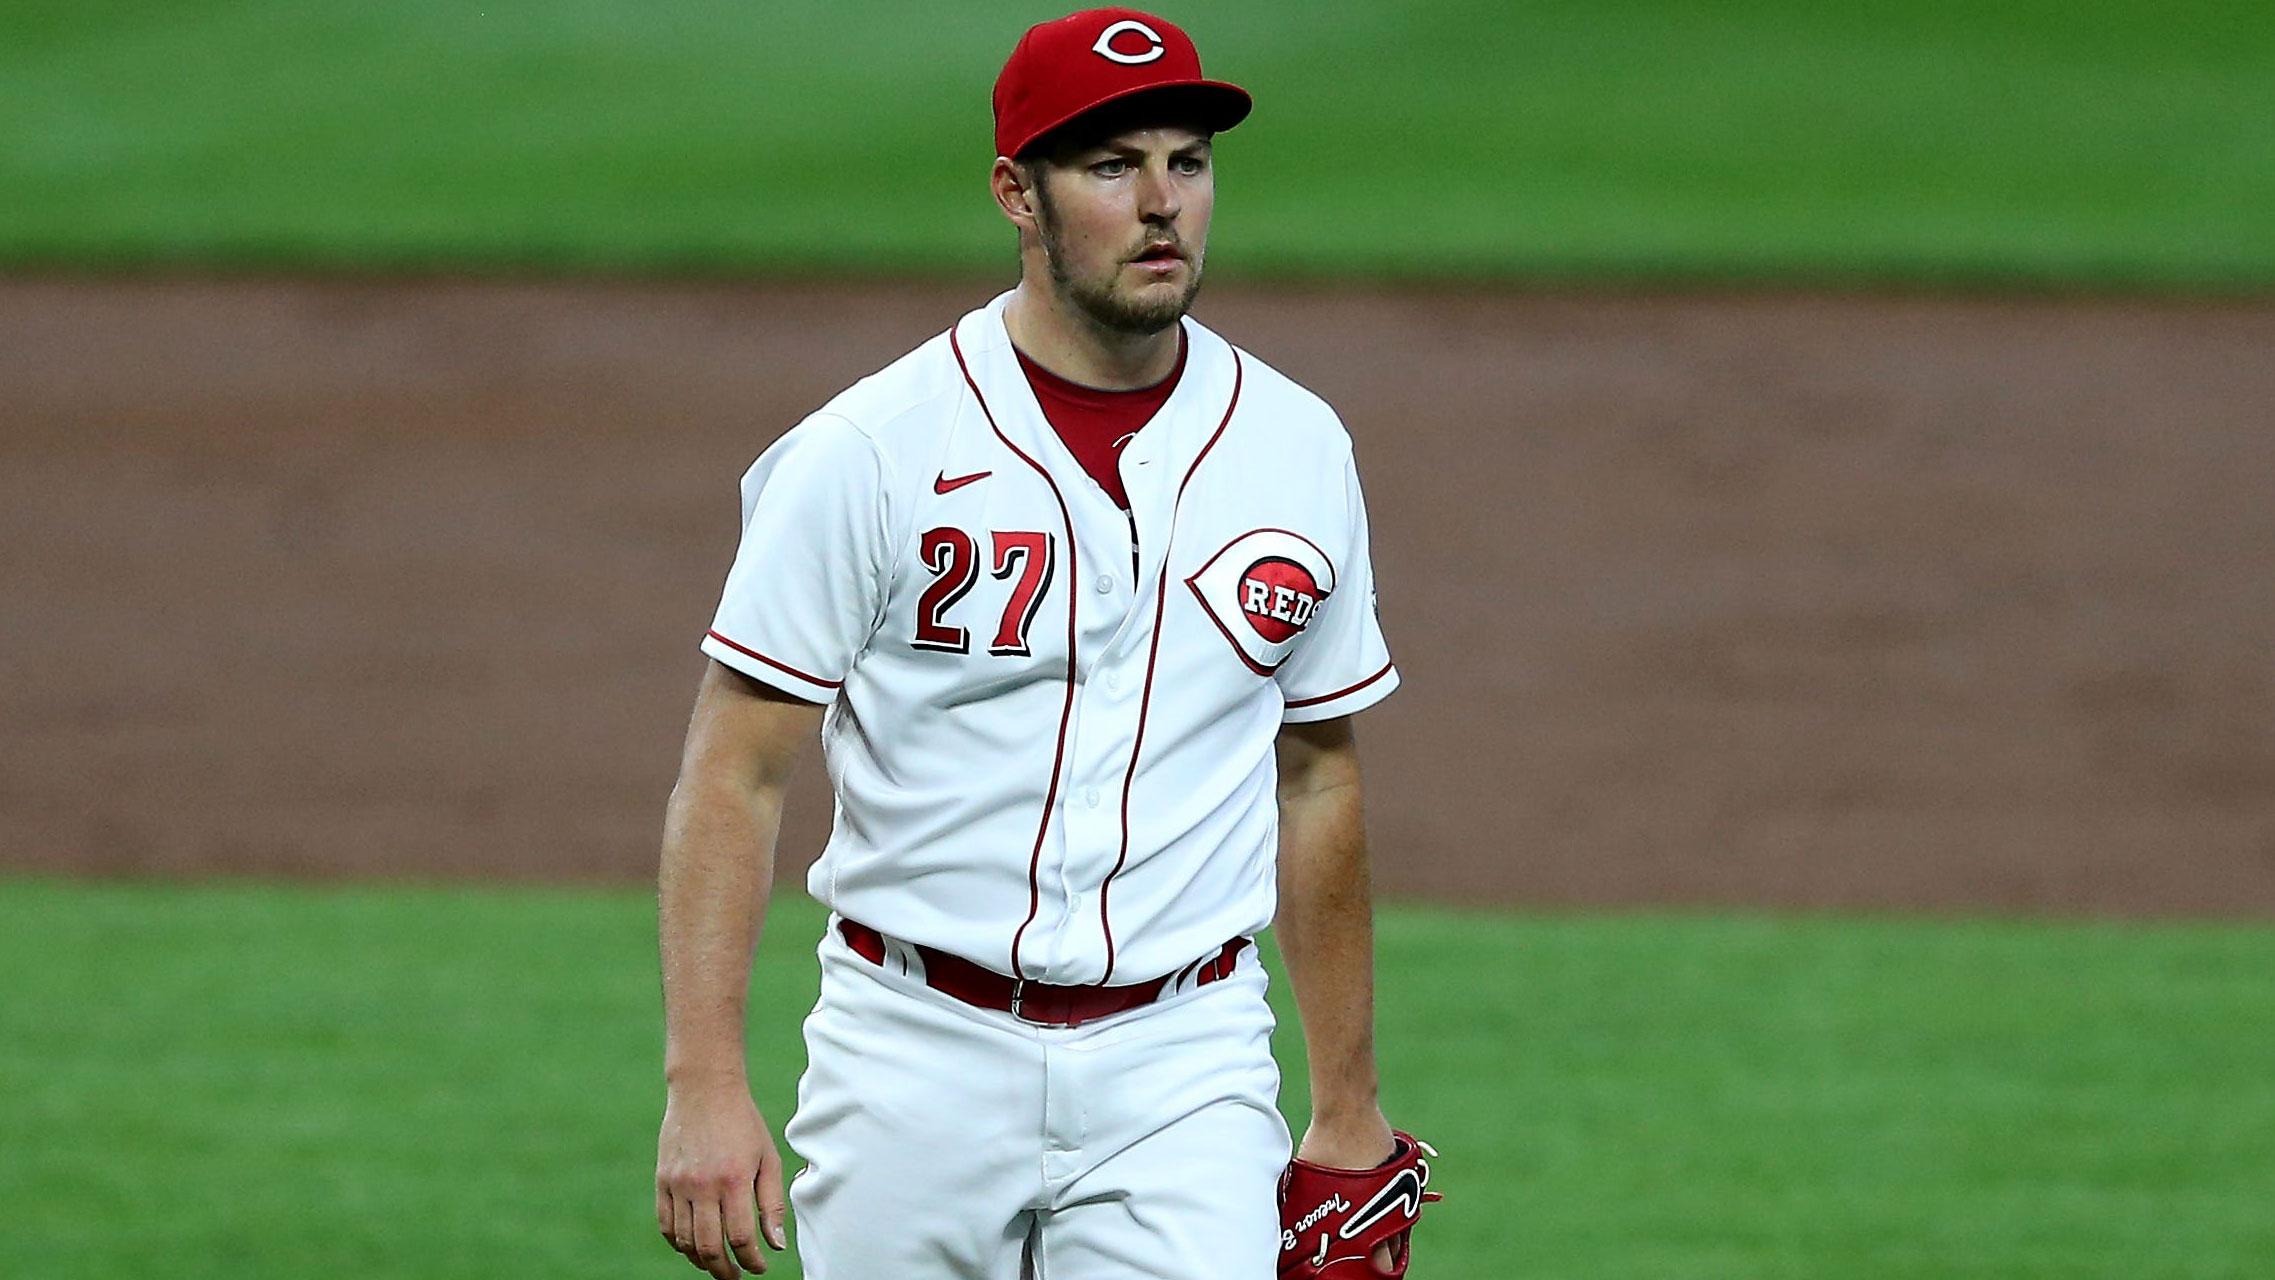 Cincinnati Reds starting pitcher Trevor Bauer (27) walks off the mound after recording the final out in the second inning of a baseball game against the Milwaukee Brewers, Wednesday, Sept. 23, 2020, at Great American Ball Park in Cincinnati. Milwaukee Brewers At Cincinnati Reds Sept 23 / Kareem Elgazzar via Imagn Content Services, LLC